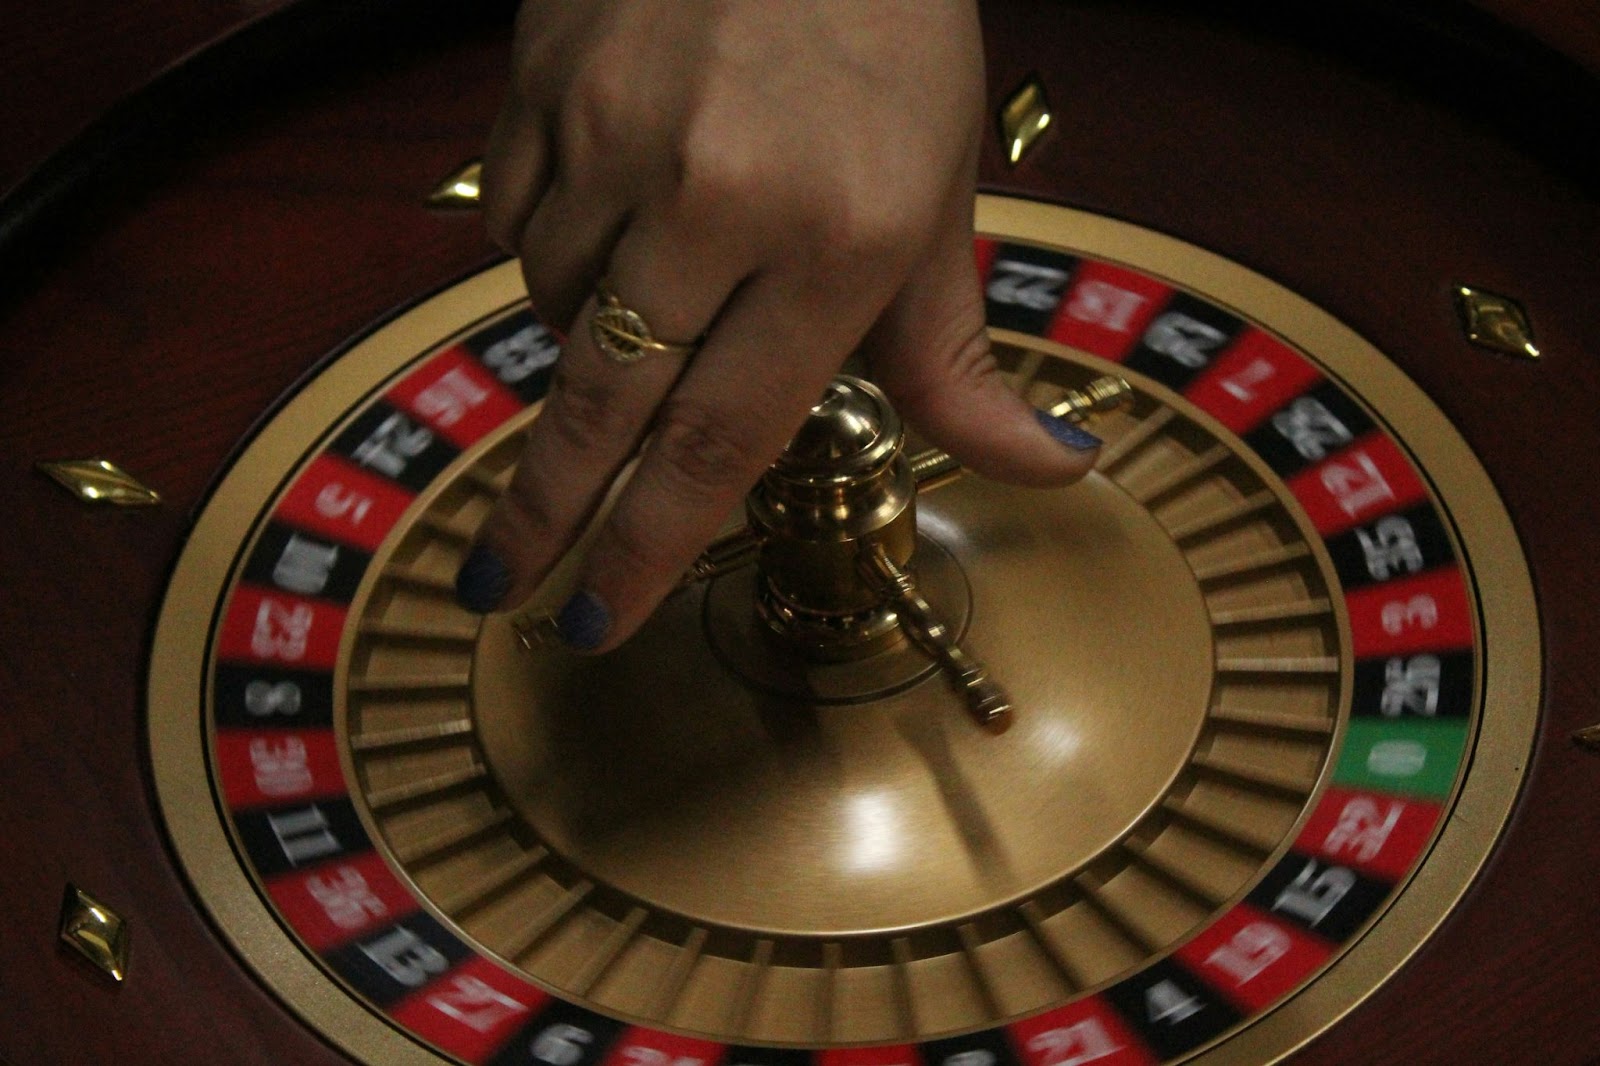 Advantages of playing roulette at online casinos compared to playing at traditional land-based casinos